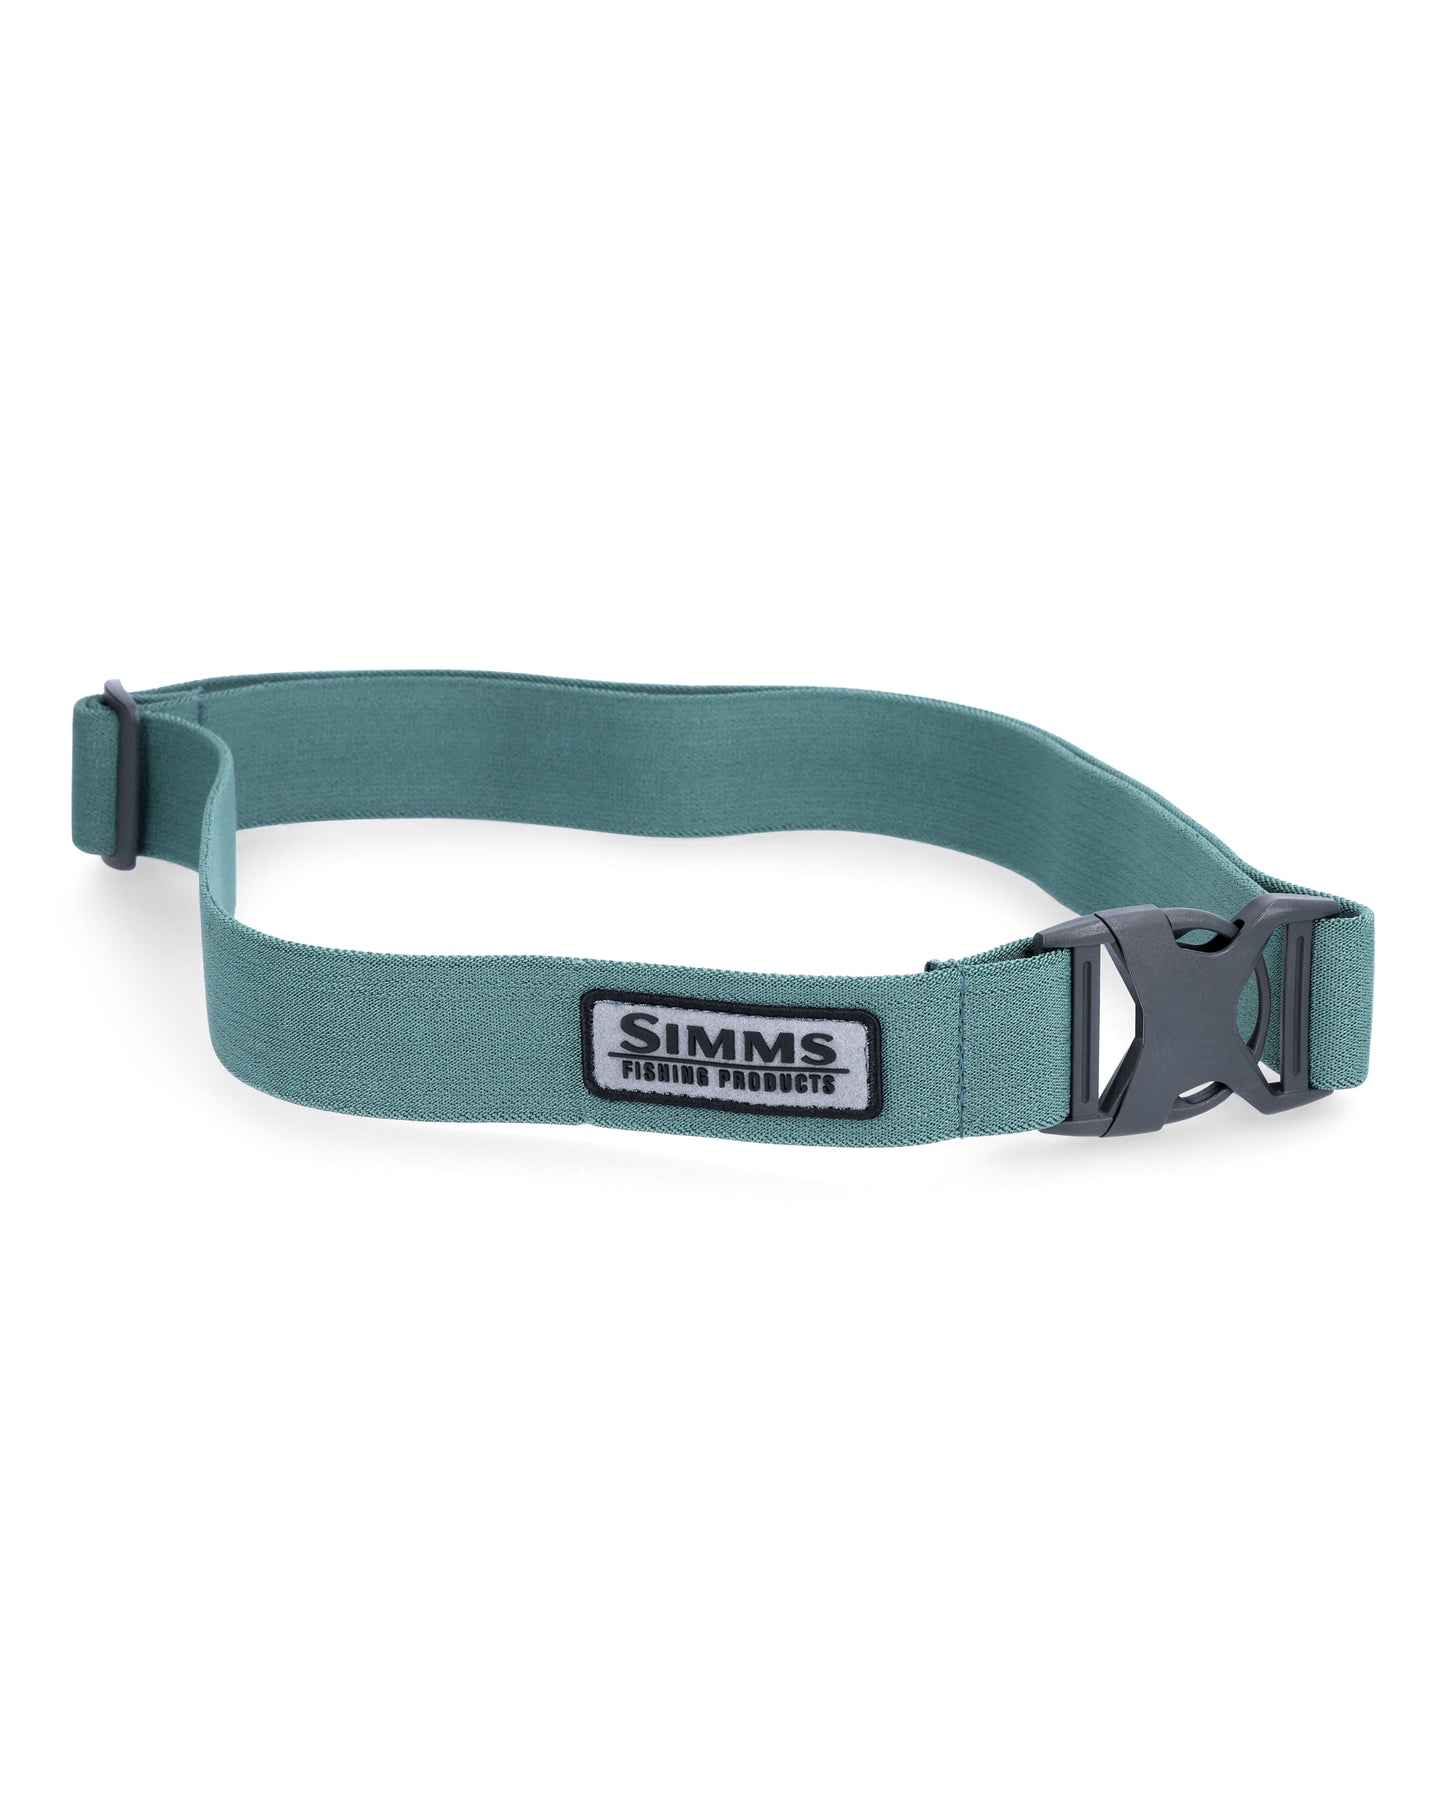 Wading Belt - 1.5  Simms Fishing Products